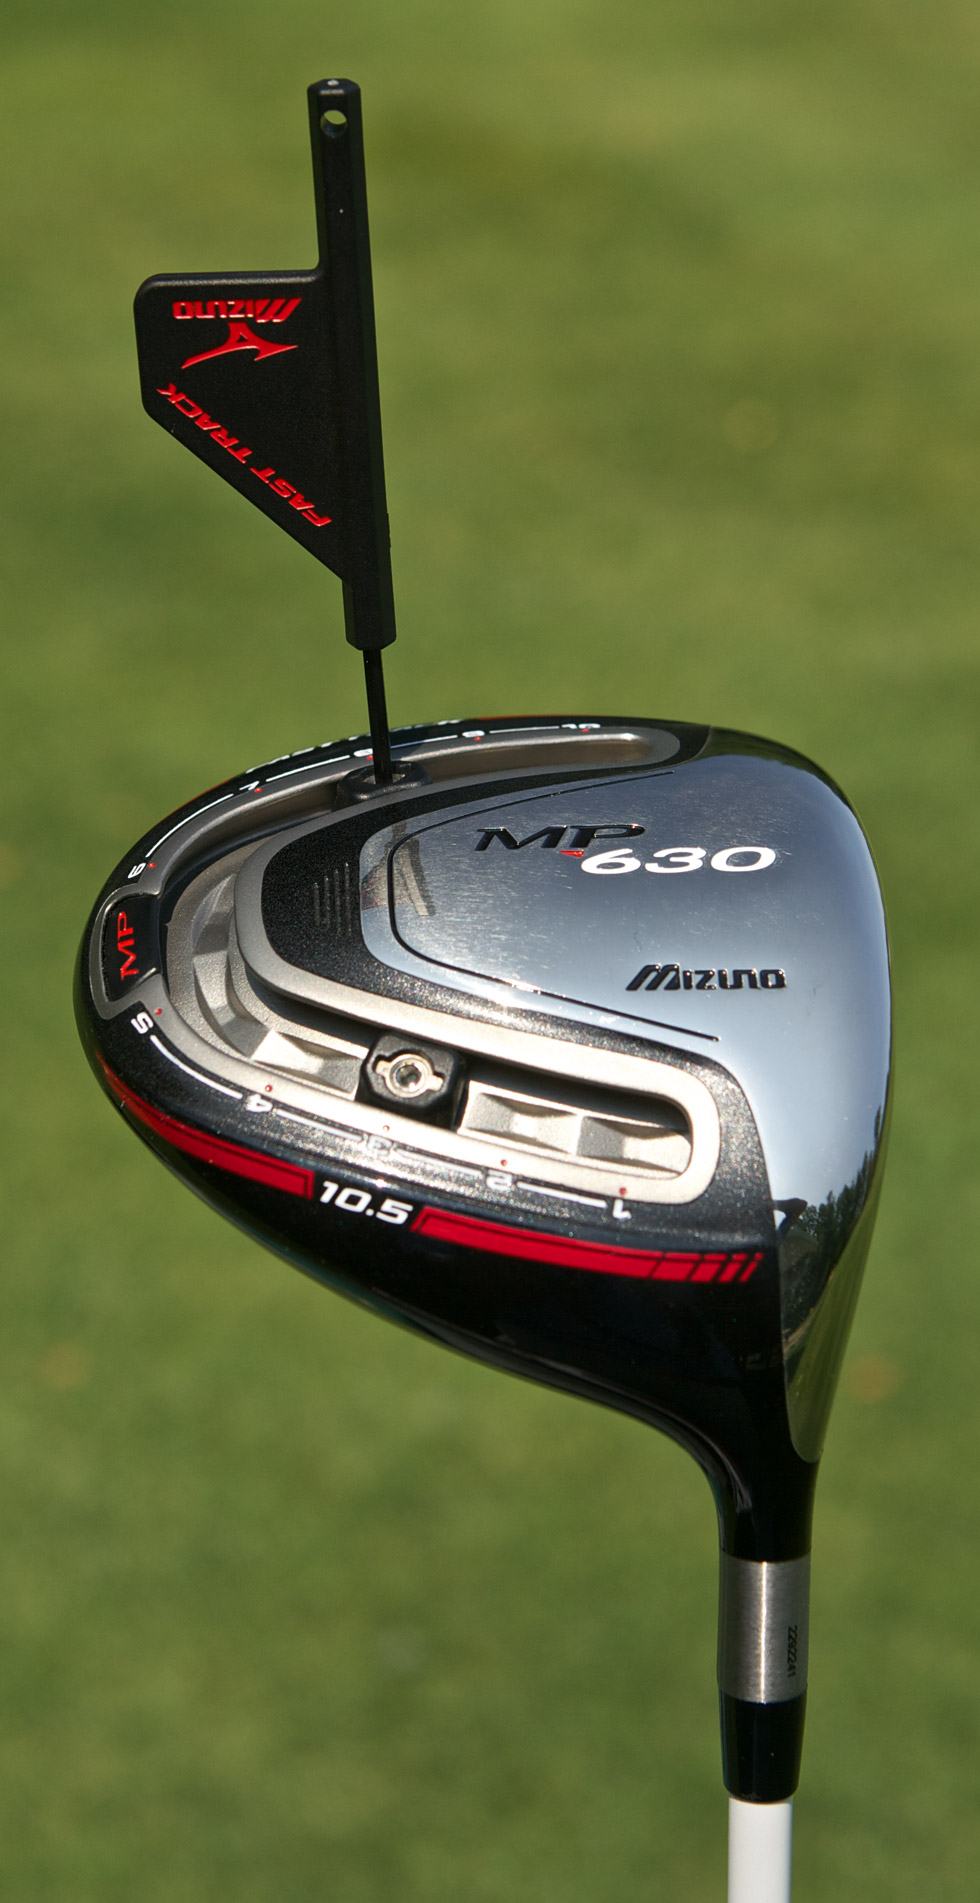 Mizuno MP-630 Fast Track Driver Review (Clubs, Review) - The Sand Trap